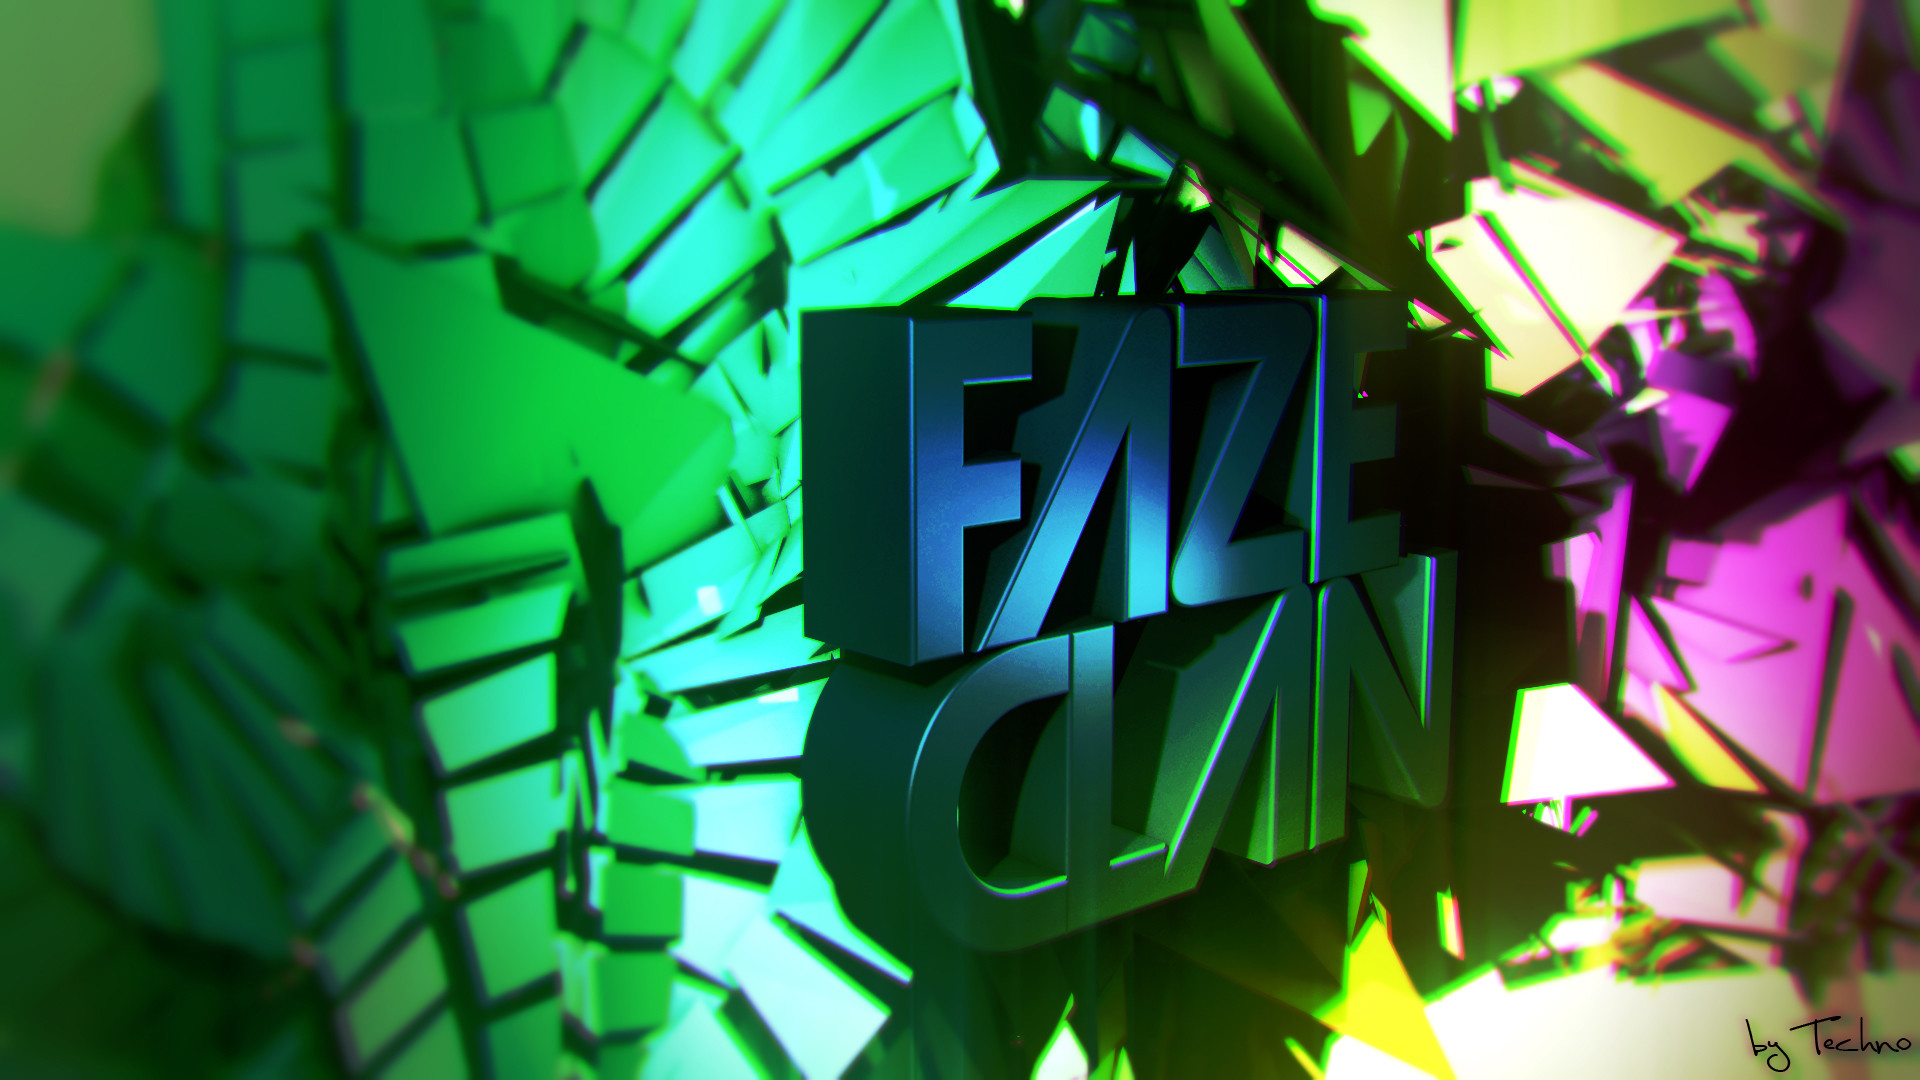 1920x1080 Related Pictures gfx background just for fun